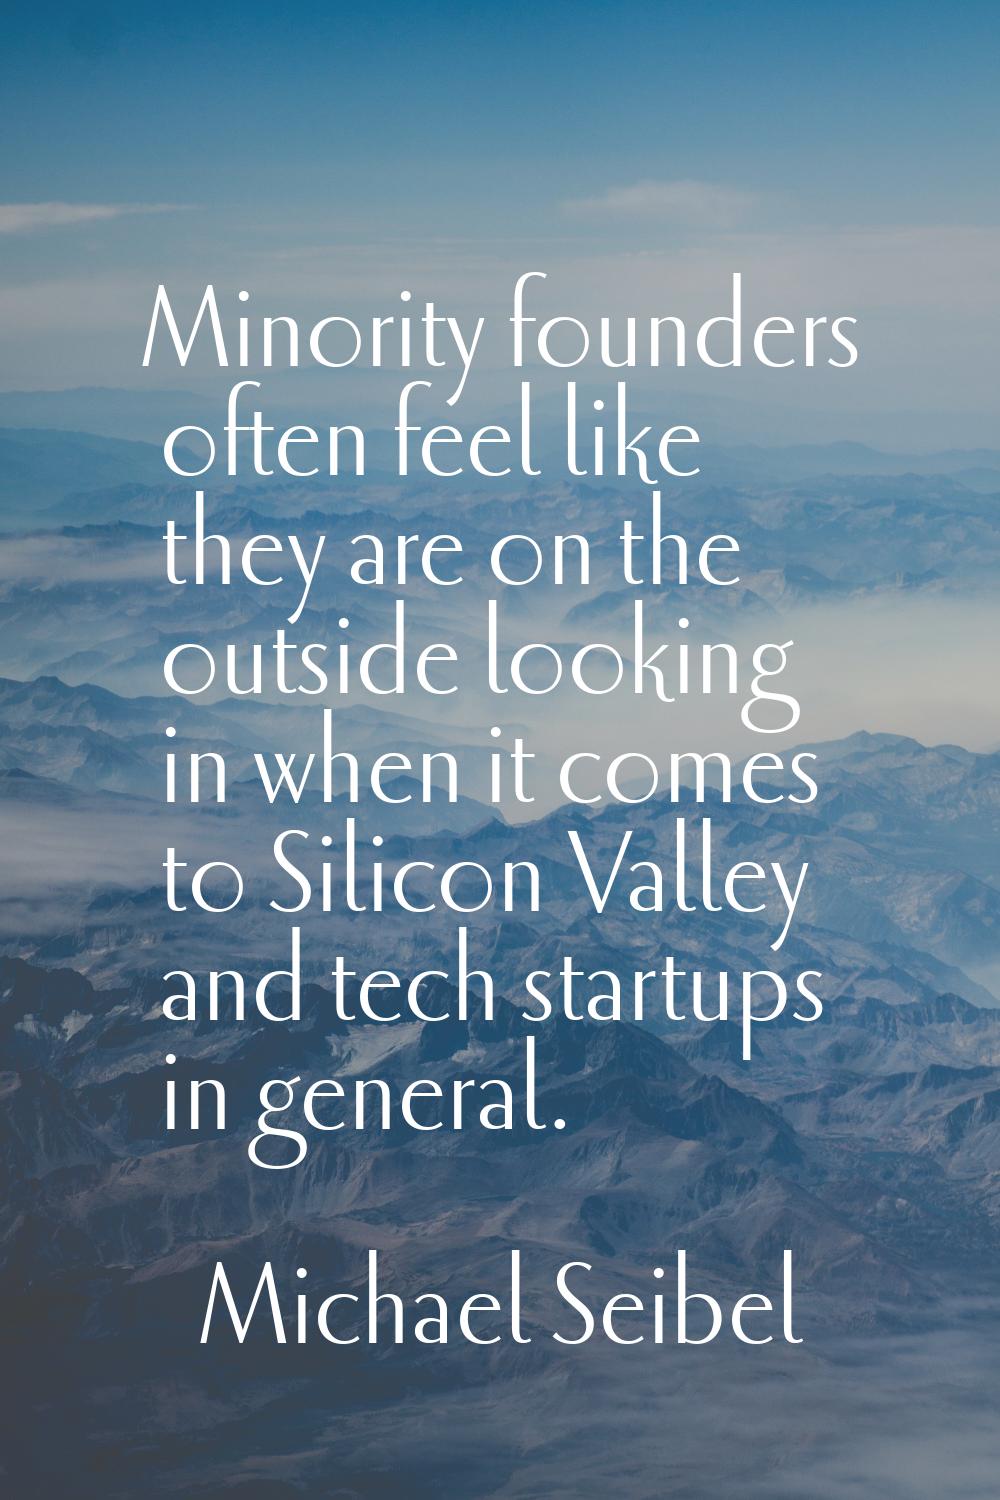 Minority founders often feel like they are on the outside looking in when it comes to Silicon Valle